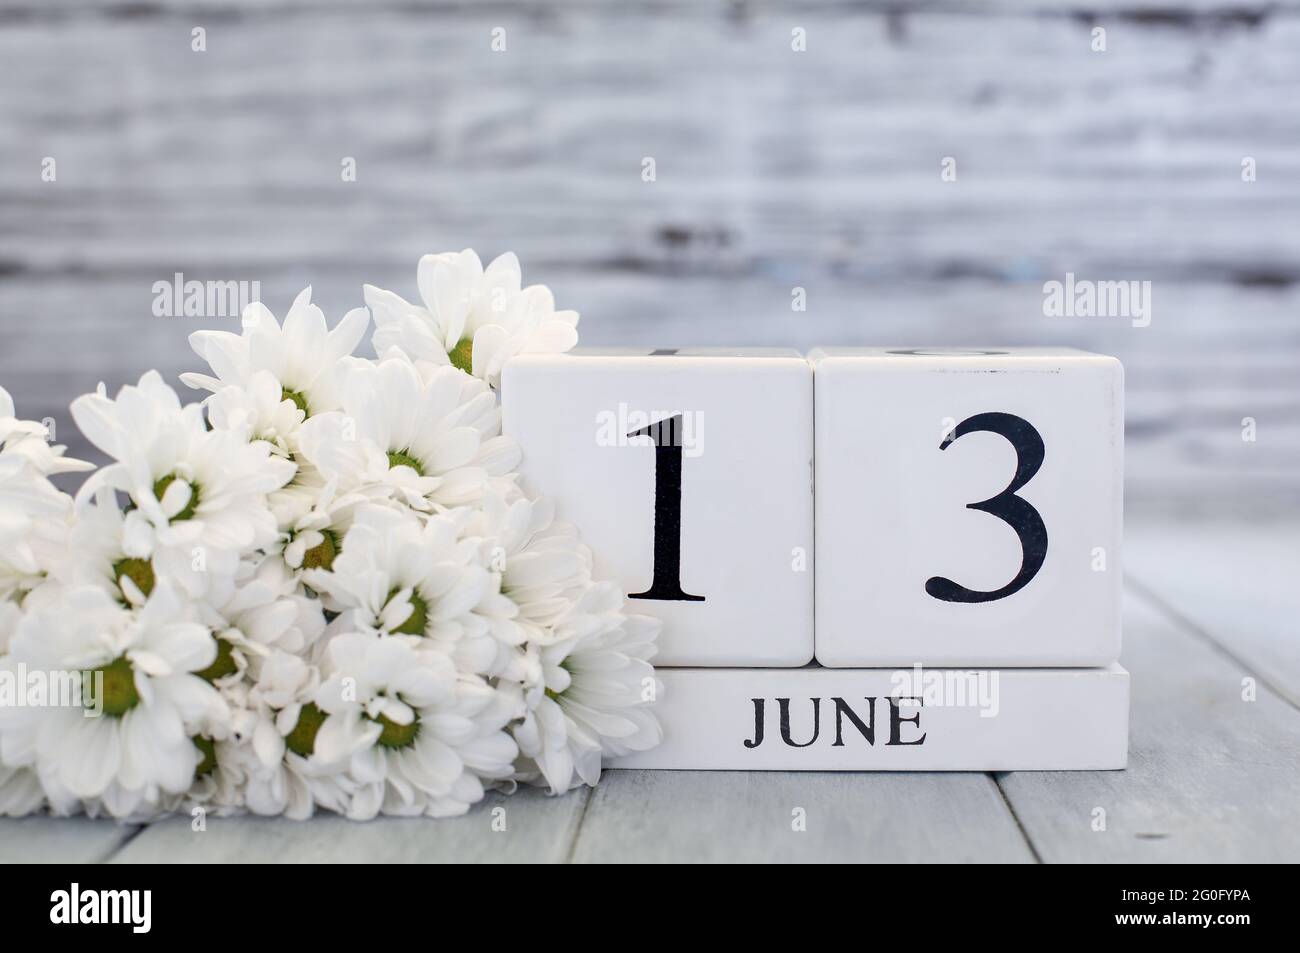 White wood calendar blocks with the date June 13th and white daisies. Selective focus with blurred background. Stock Photo